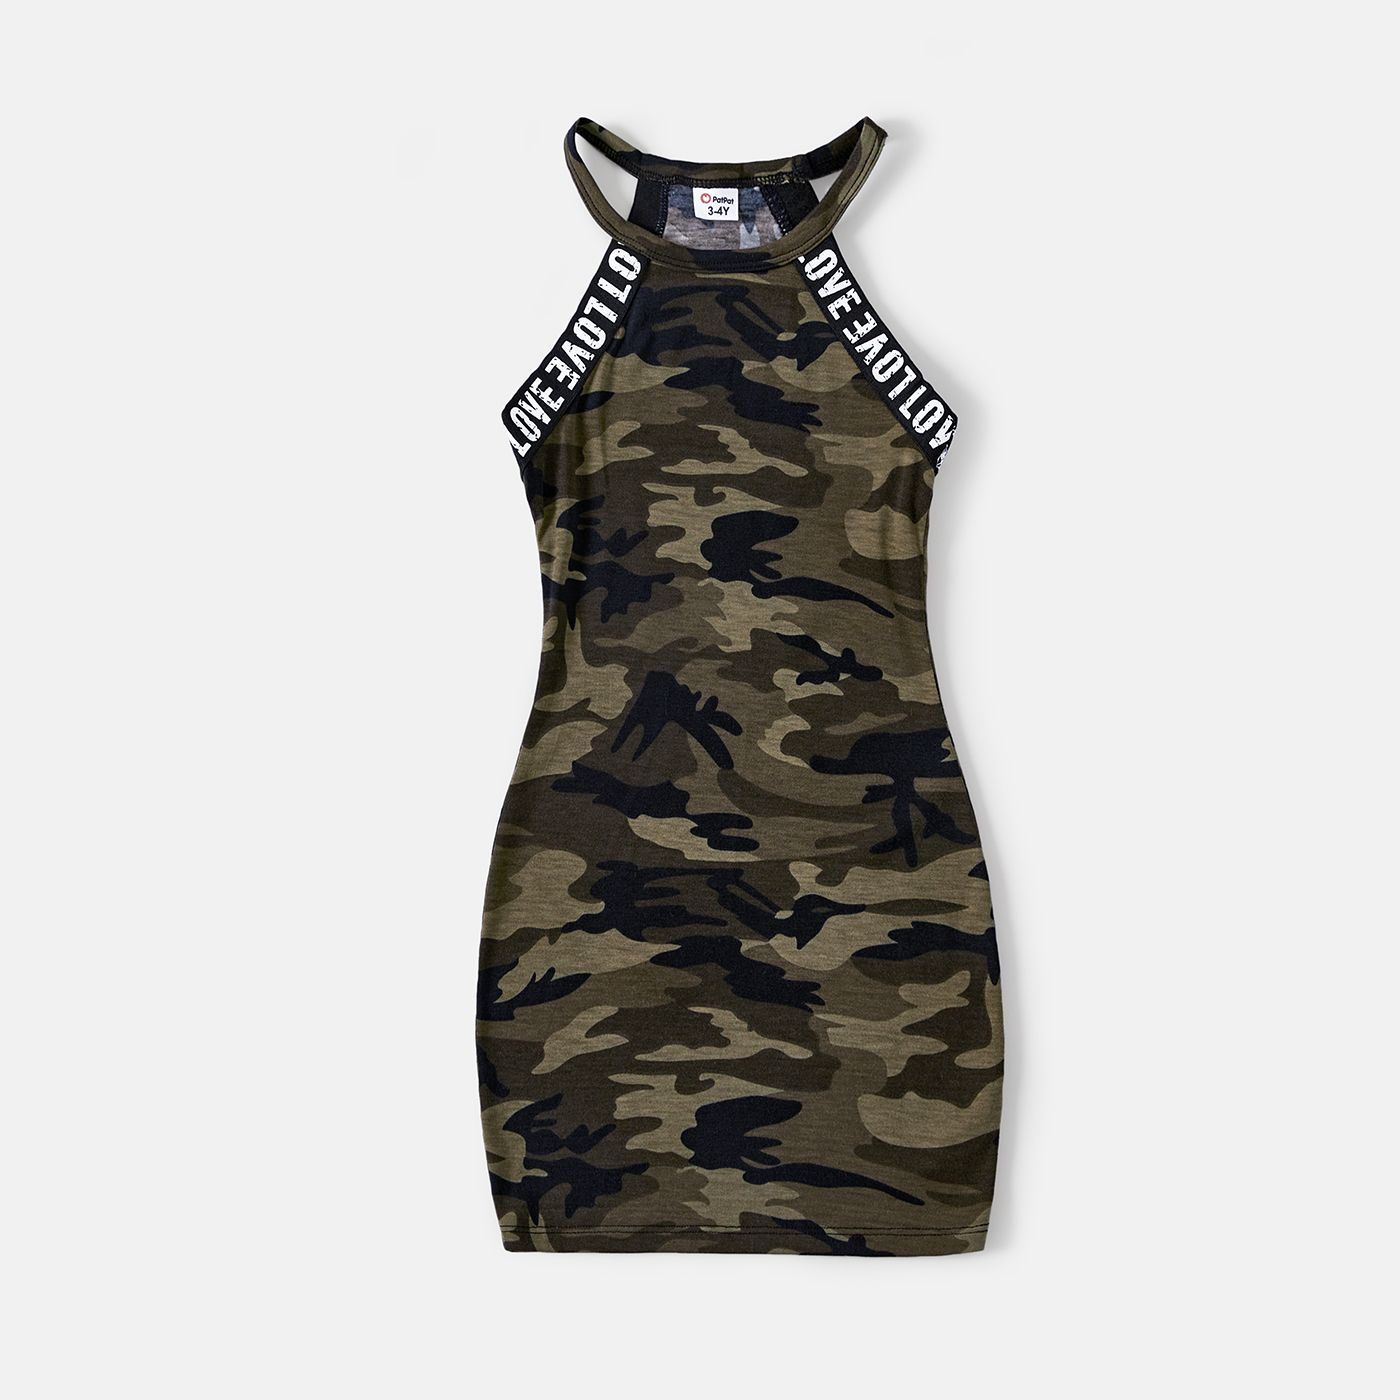 Family Matching Letter Design Camouflage Halter Neck Sleeveless Bodycon Dresses And Cotton Short-sleeve Spliced T-shirts Sets